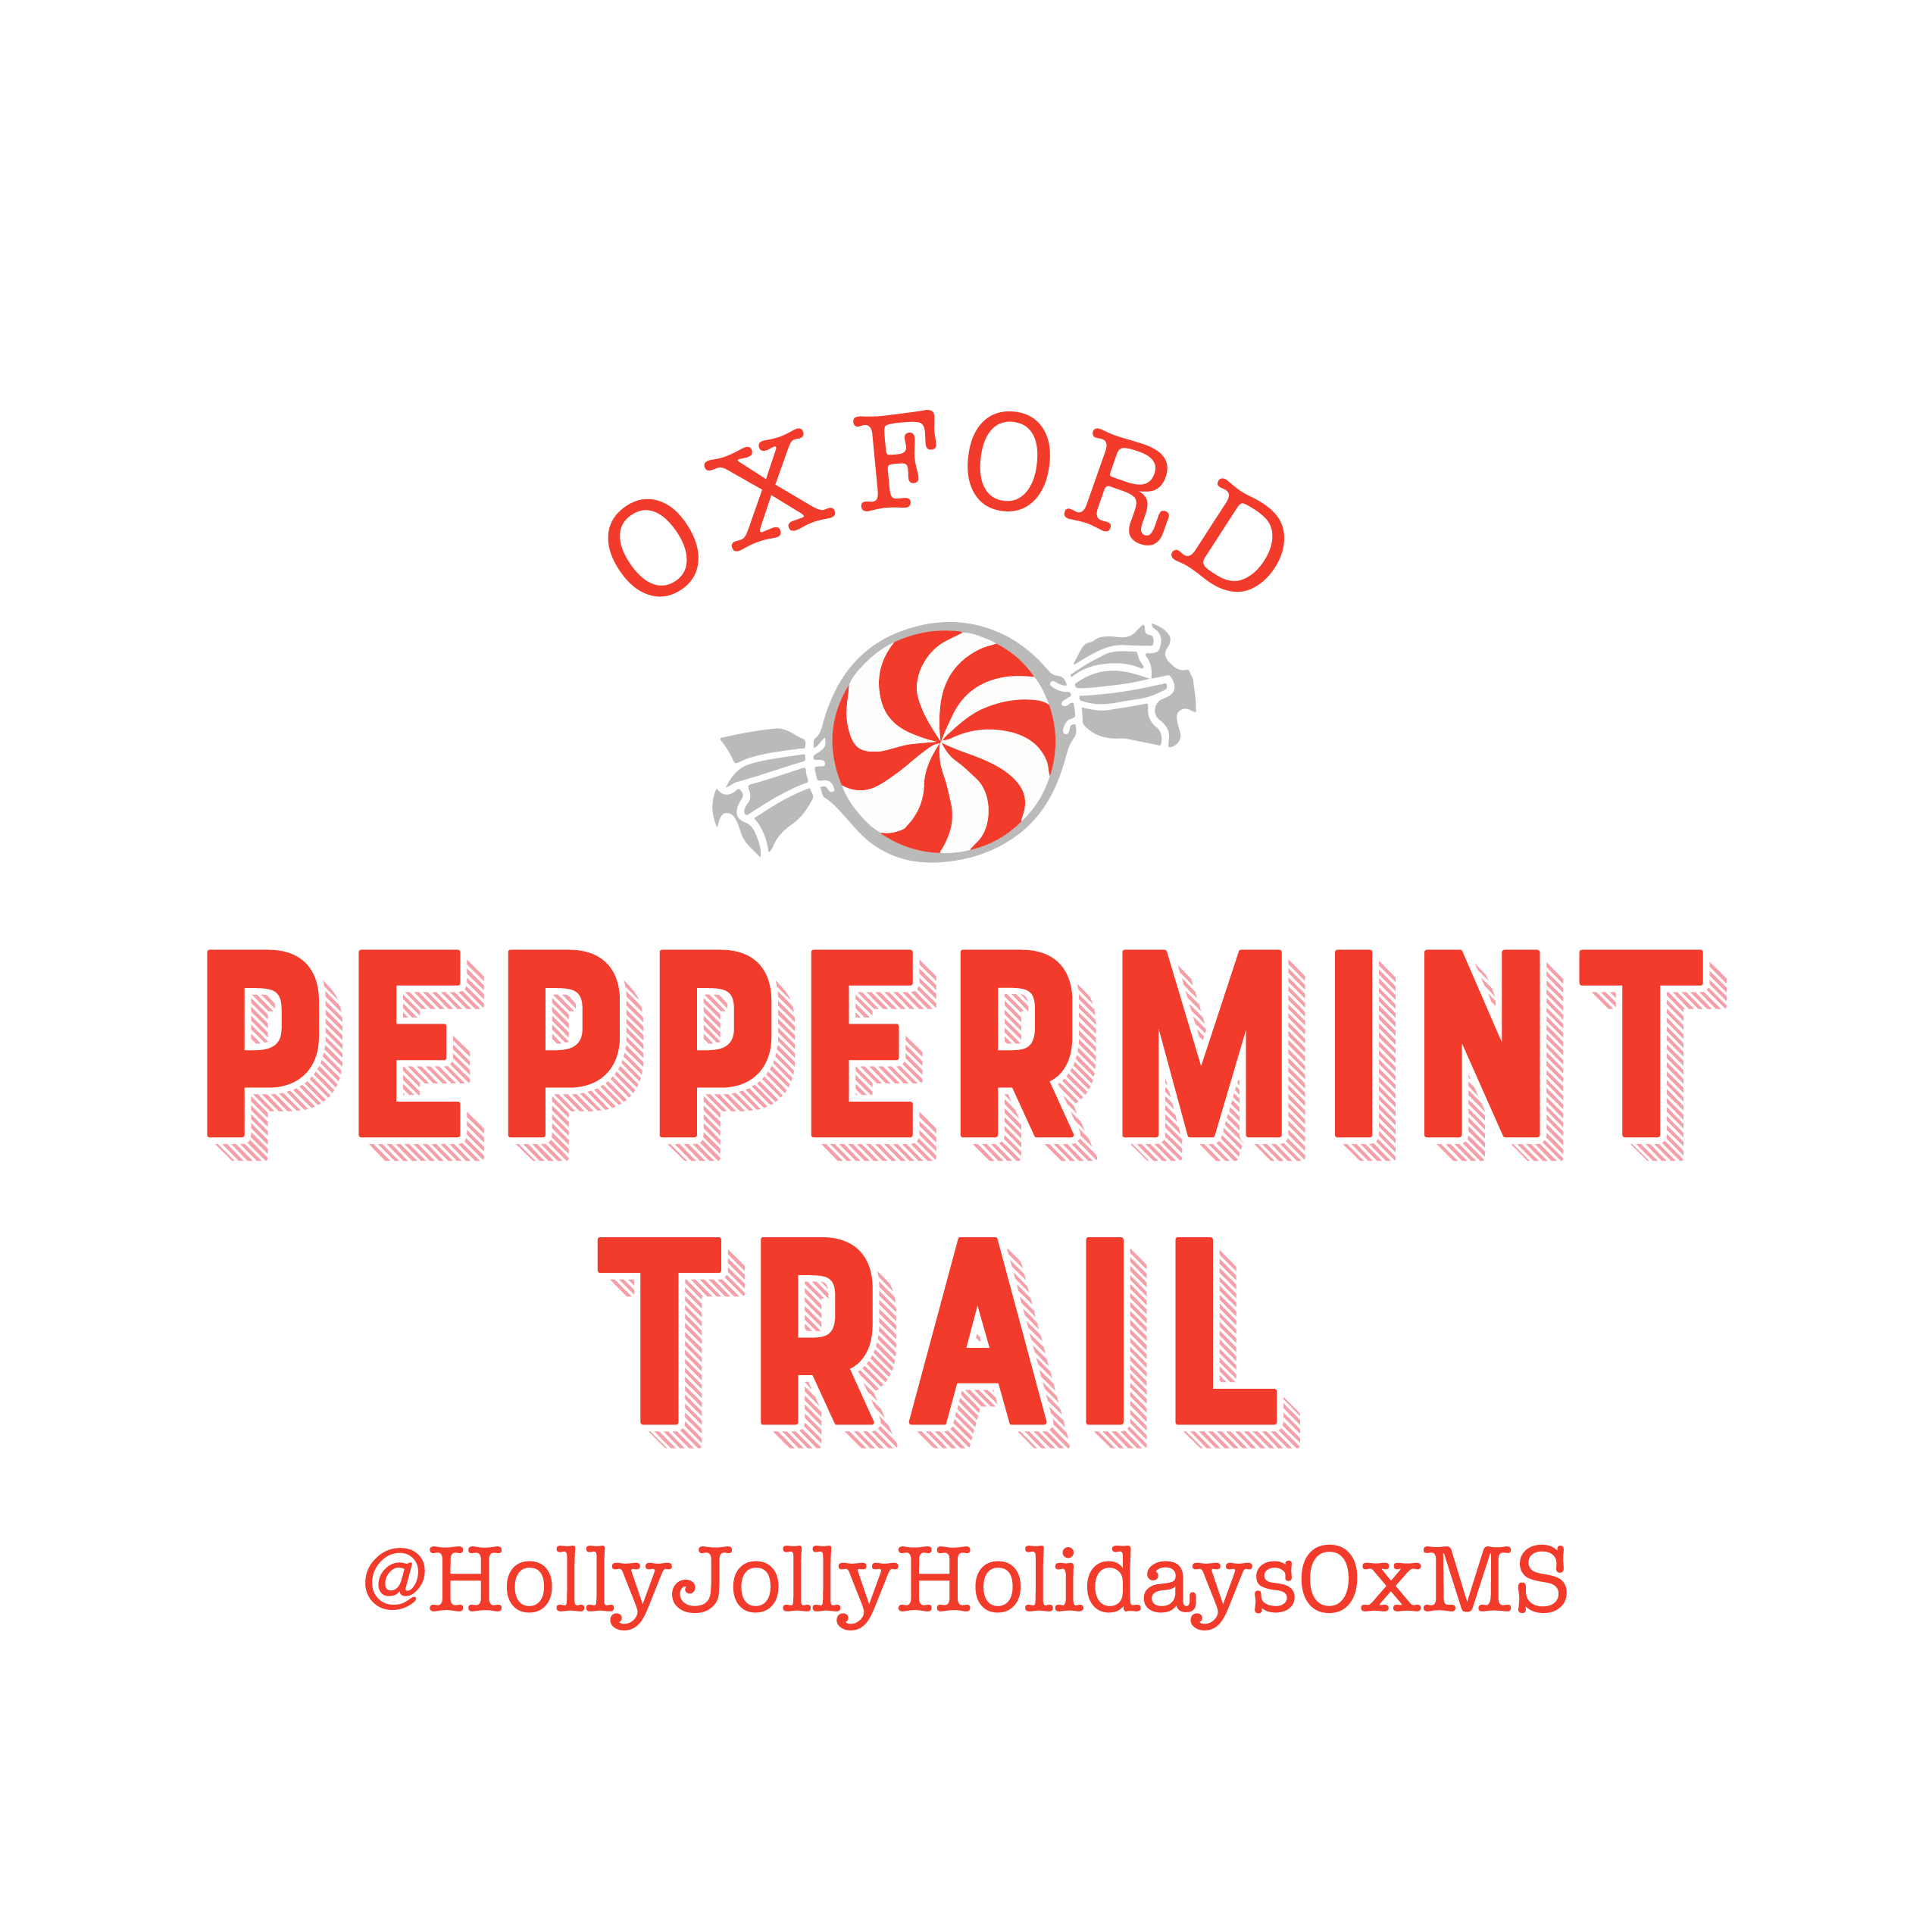 Logo that features an image of a red and white swirled peppermint cant and says " Oxford Peppermint Trail" in red letters.